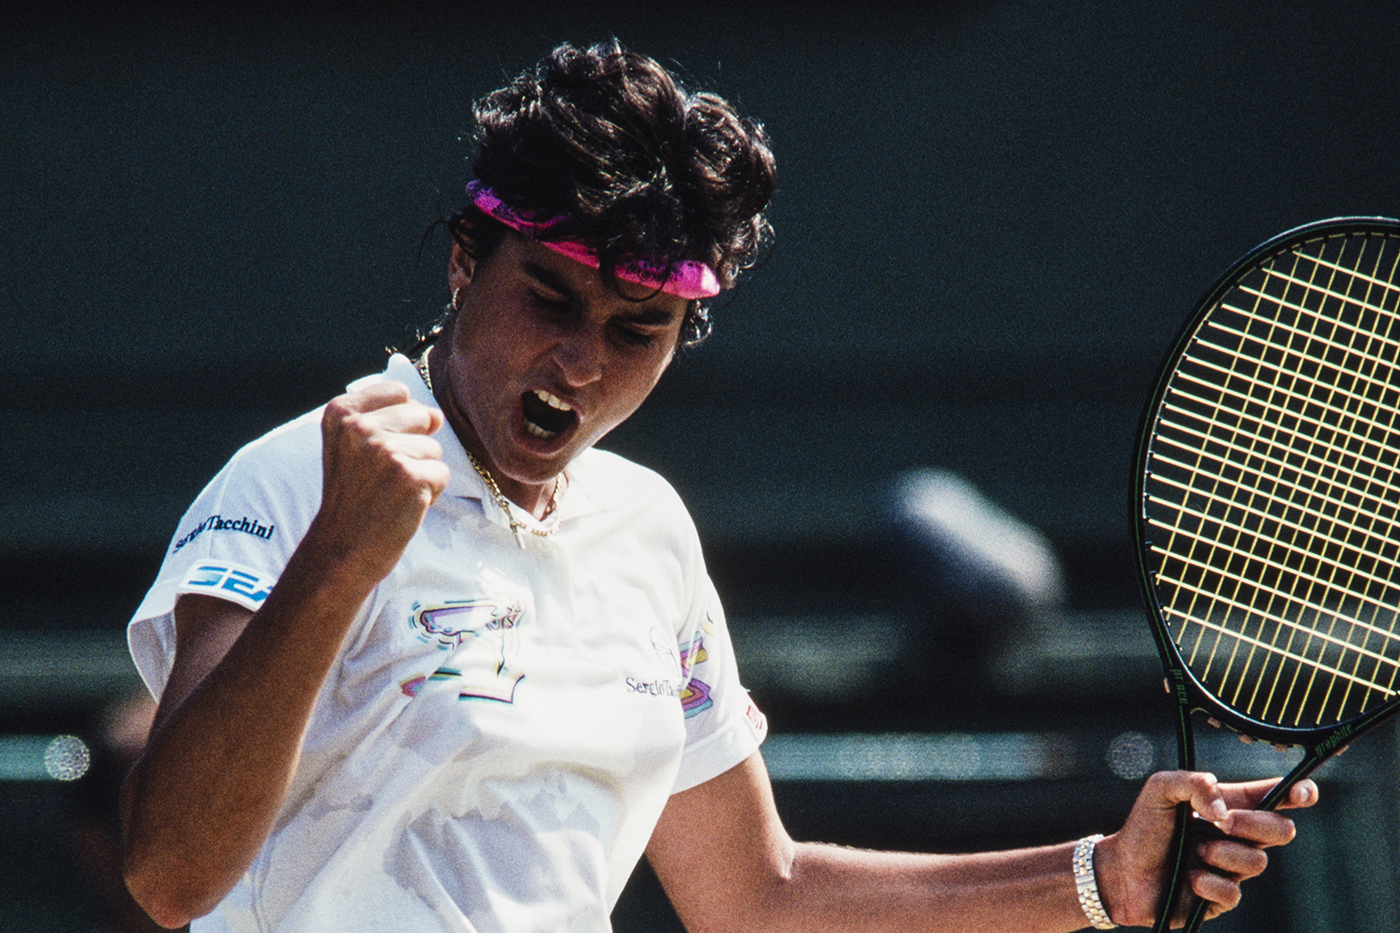 Monica Seles serves as she competes in the U.S. Open Tennis tournament in  New York, September 2, 1995. Seles is a Yugoslav-born, ethnic Hungarian,  American former world number one professional tennis player